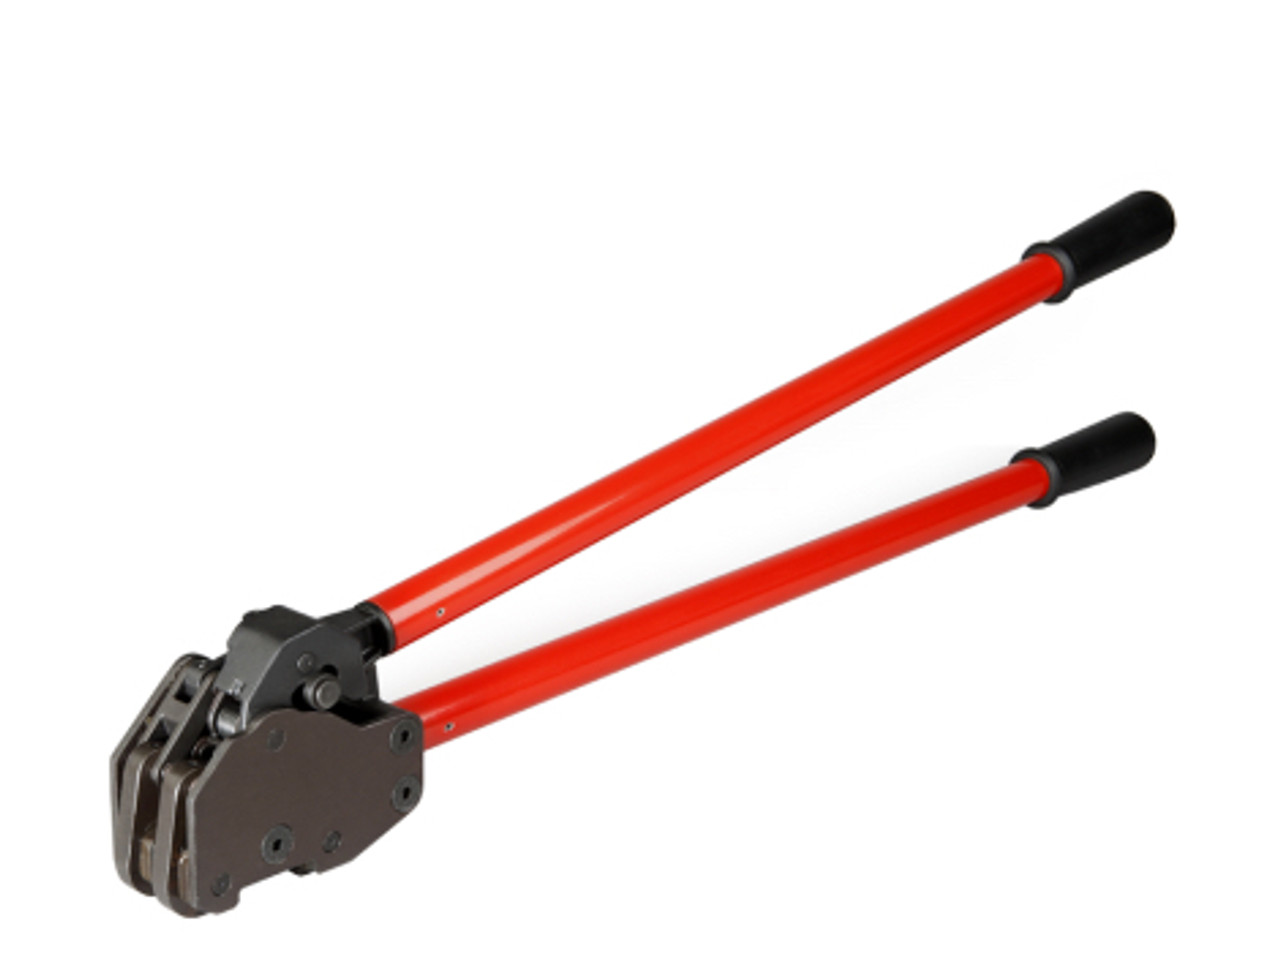 MUL-430 Heavy Duty Dual-Action Sealer for 1 1/4" (32 mm) Steel Strapping